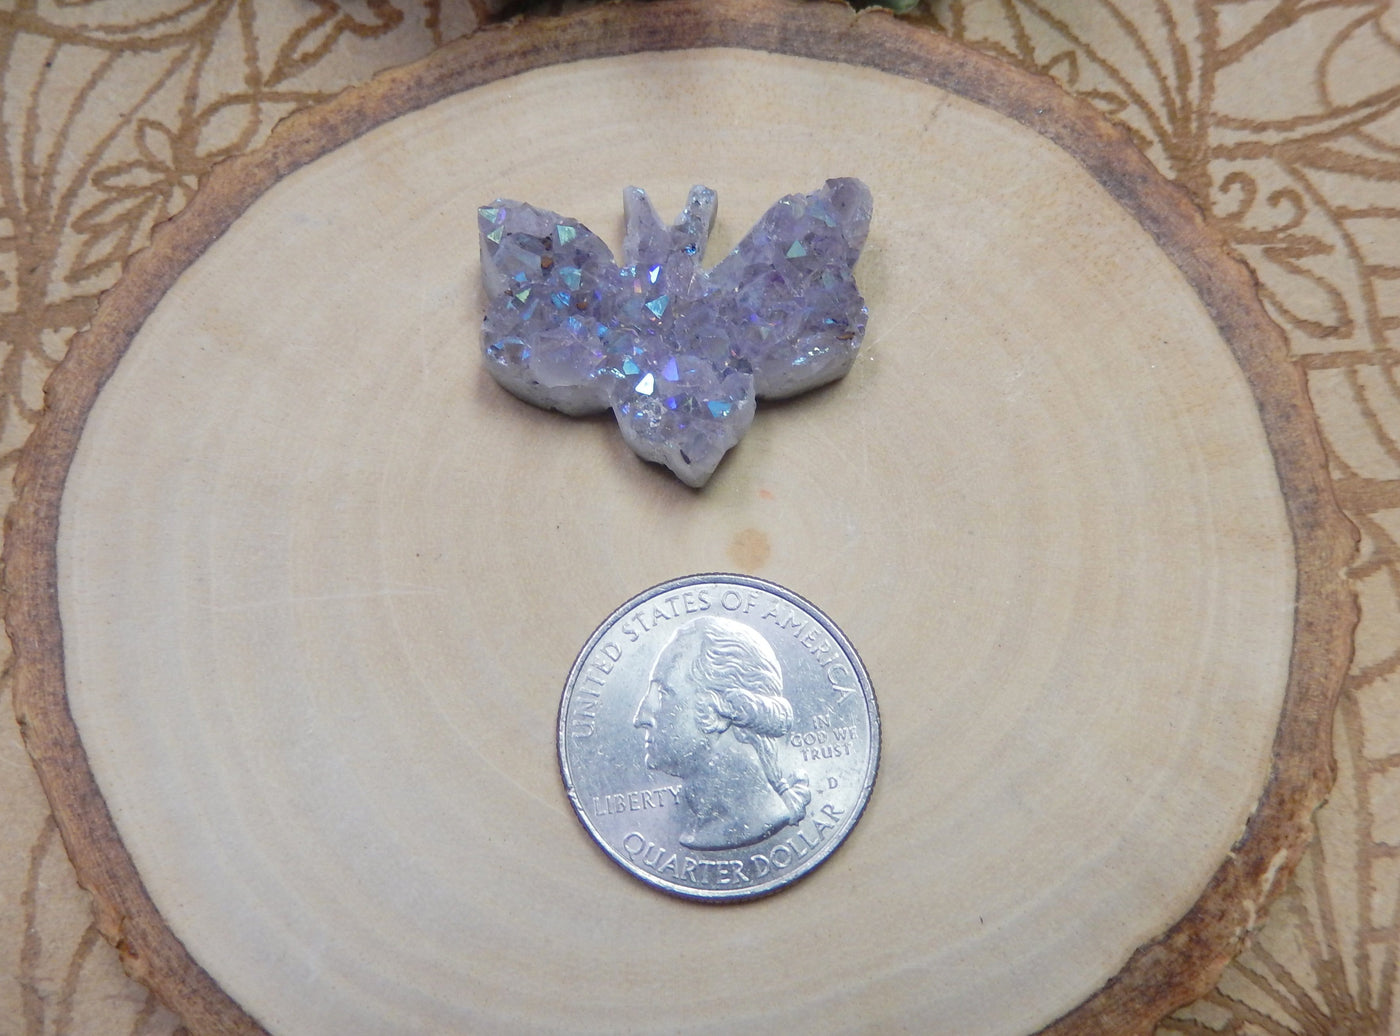 Titanium Cabochon Druzy Bumblebee Undrilled Pendant pictured above a quarter for size reference